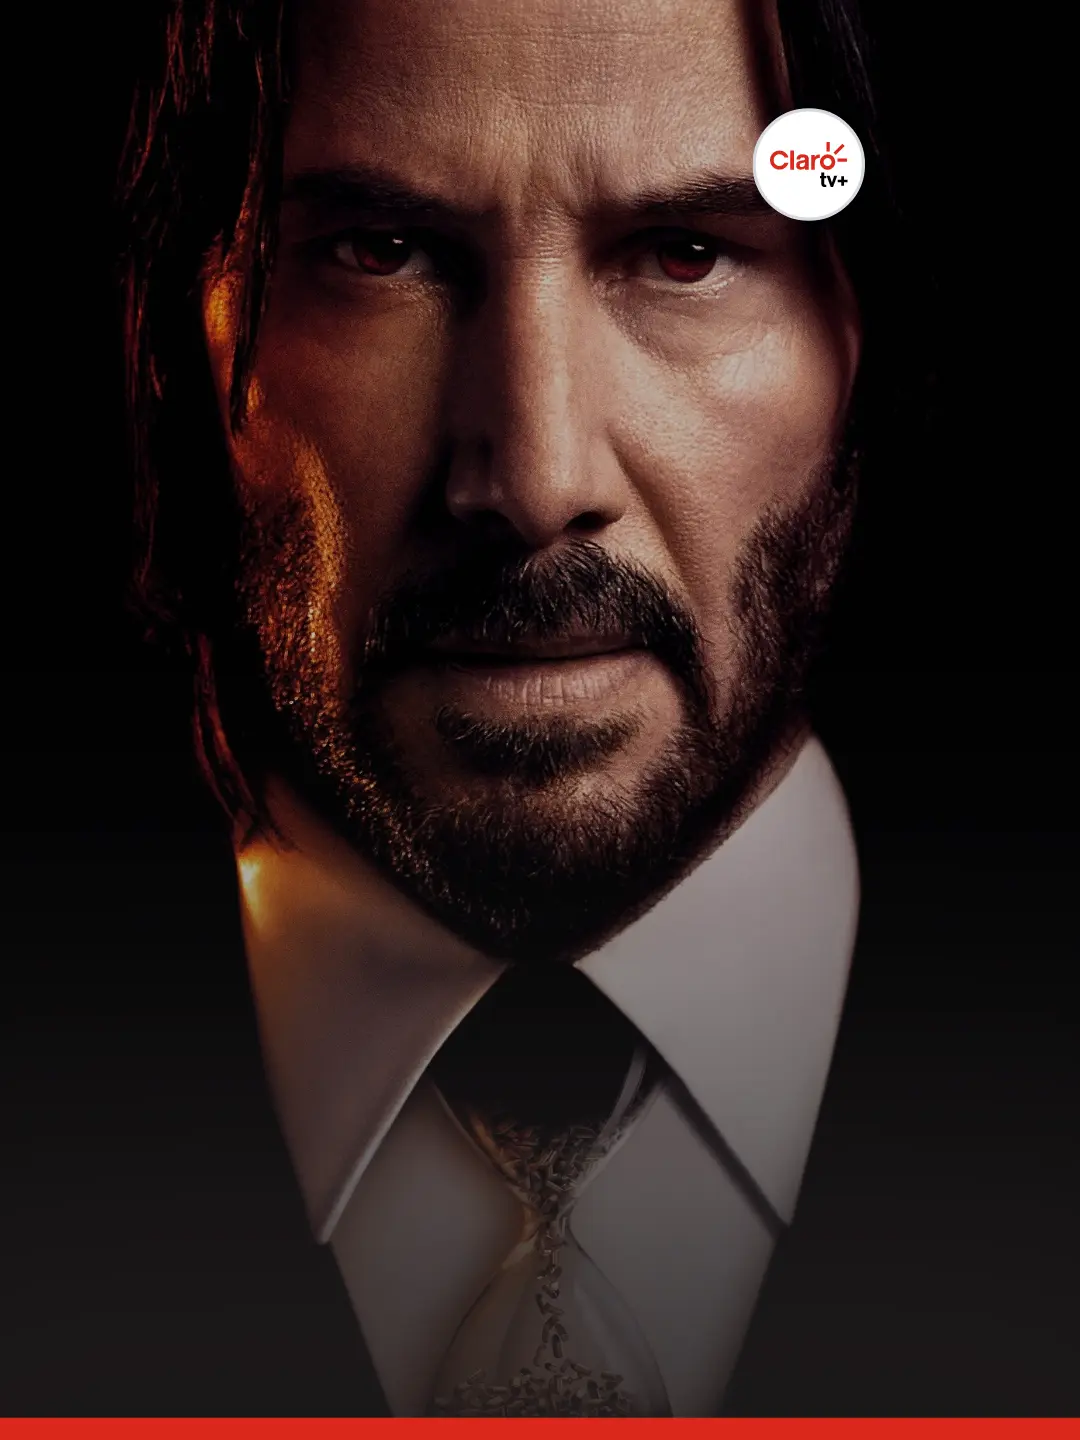 John Wick: Chapter 4' producer, director talk new characters